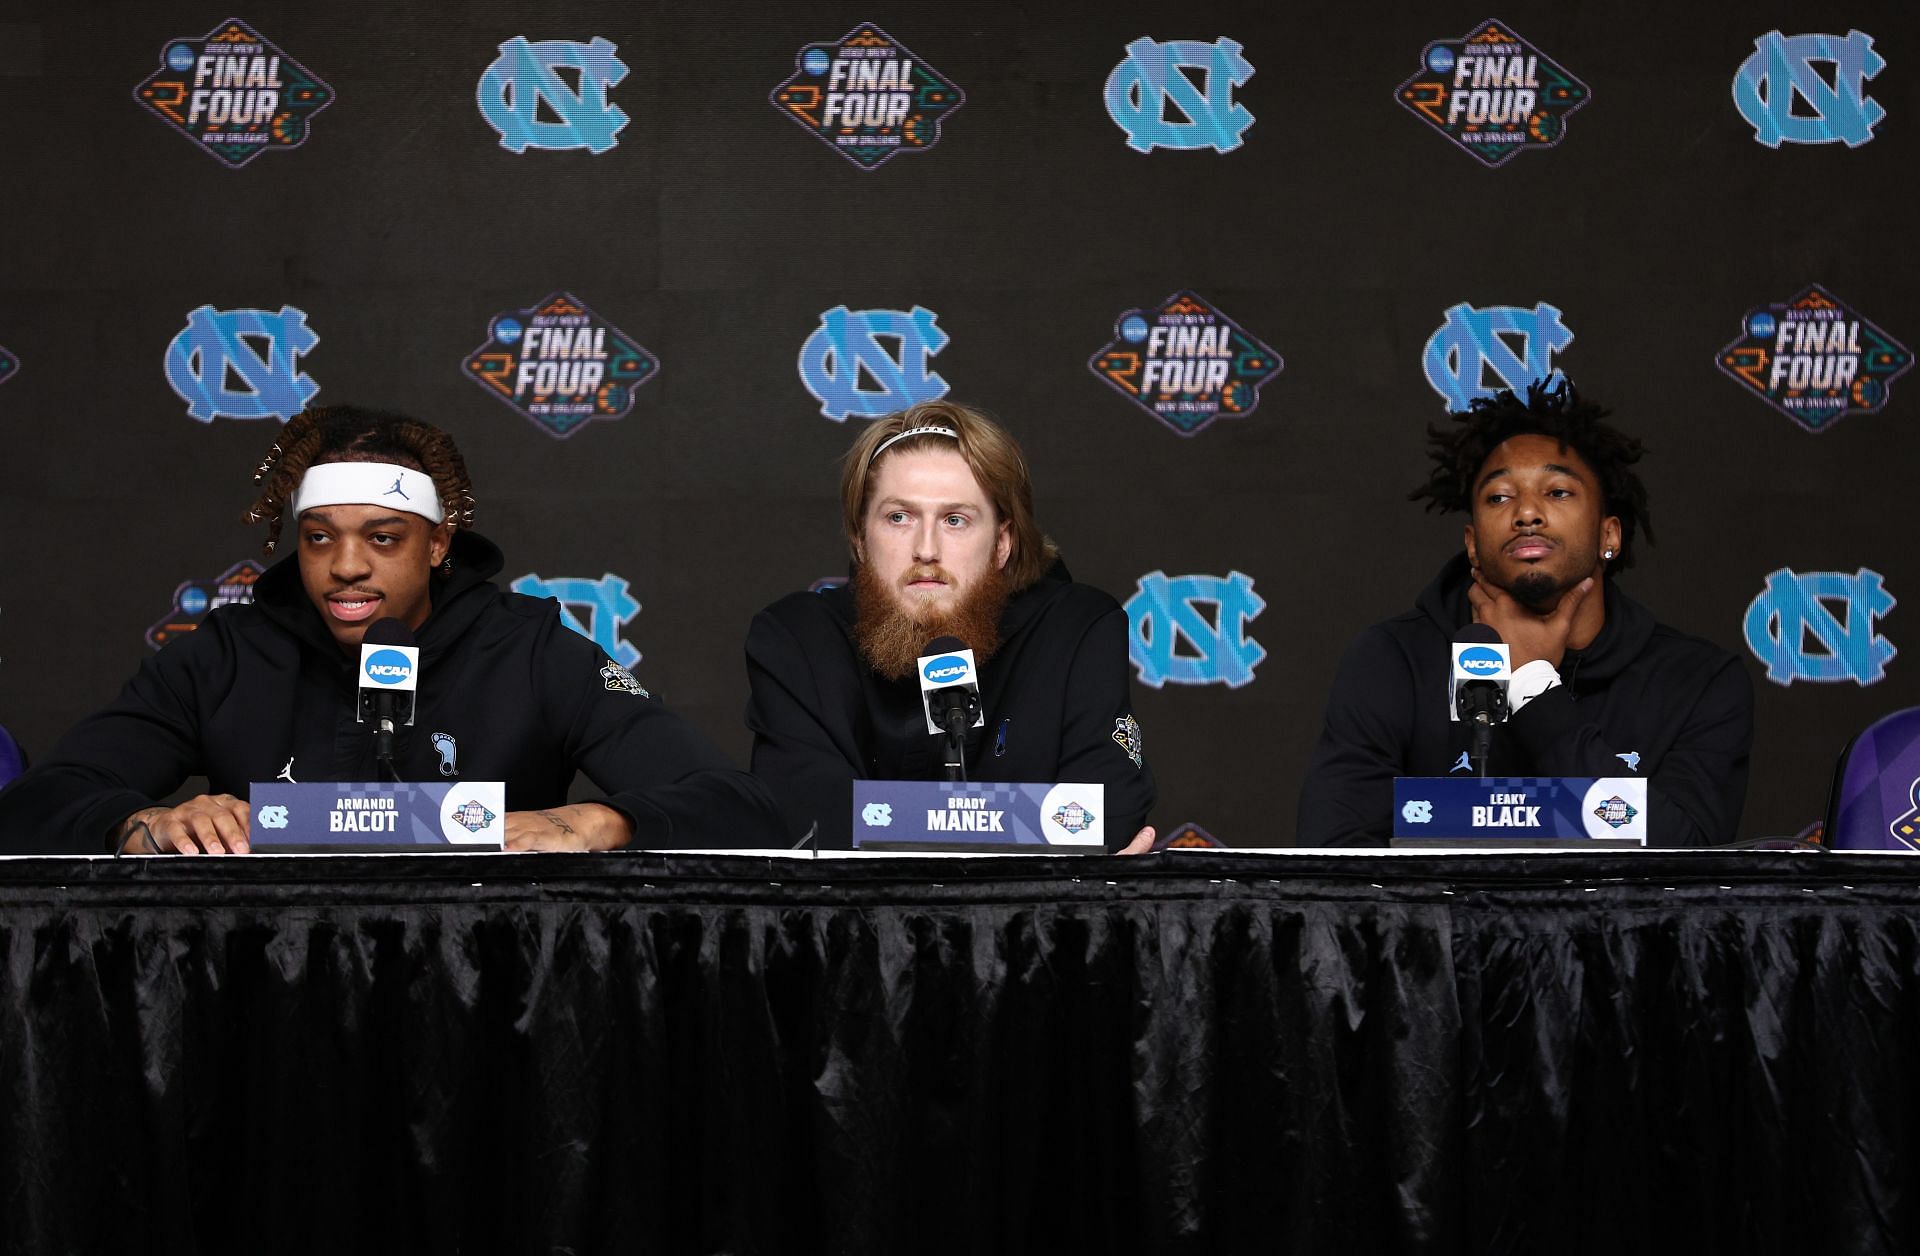 The Tar Heels will be motivated in their Final Four showdown against Duke.